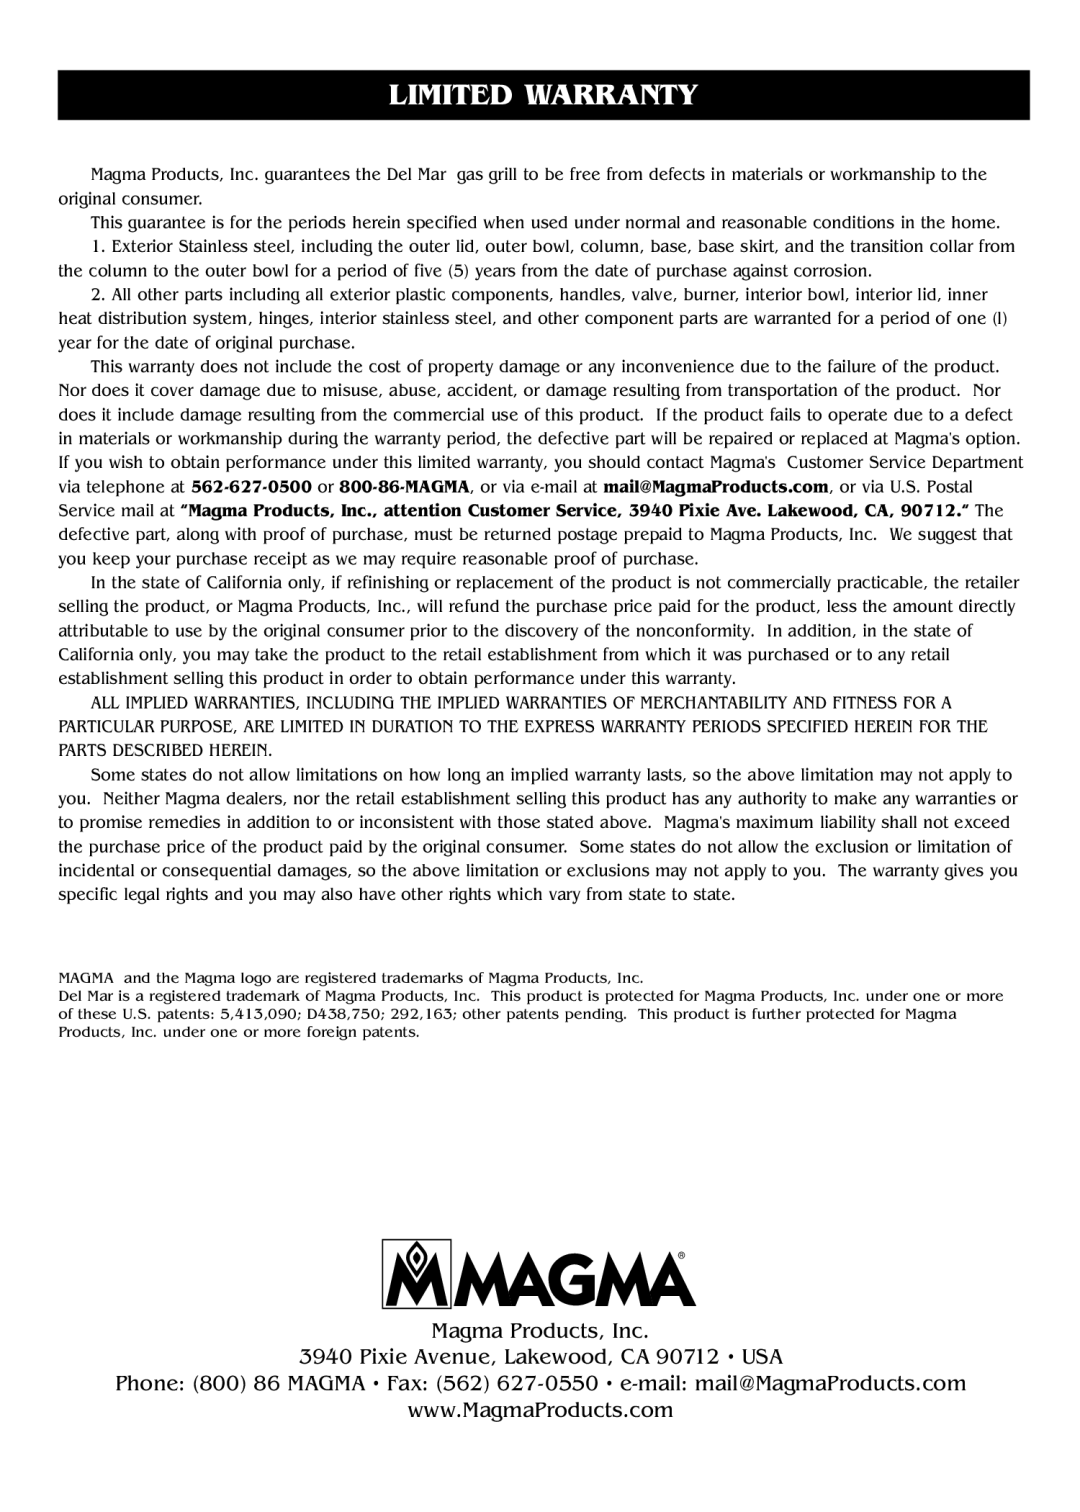 Magma DM10-016LP owner manual Limited Warranty, Magma Products, Inc 3940 Pixie Avenue, Lakewood, CA 90712 USA 